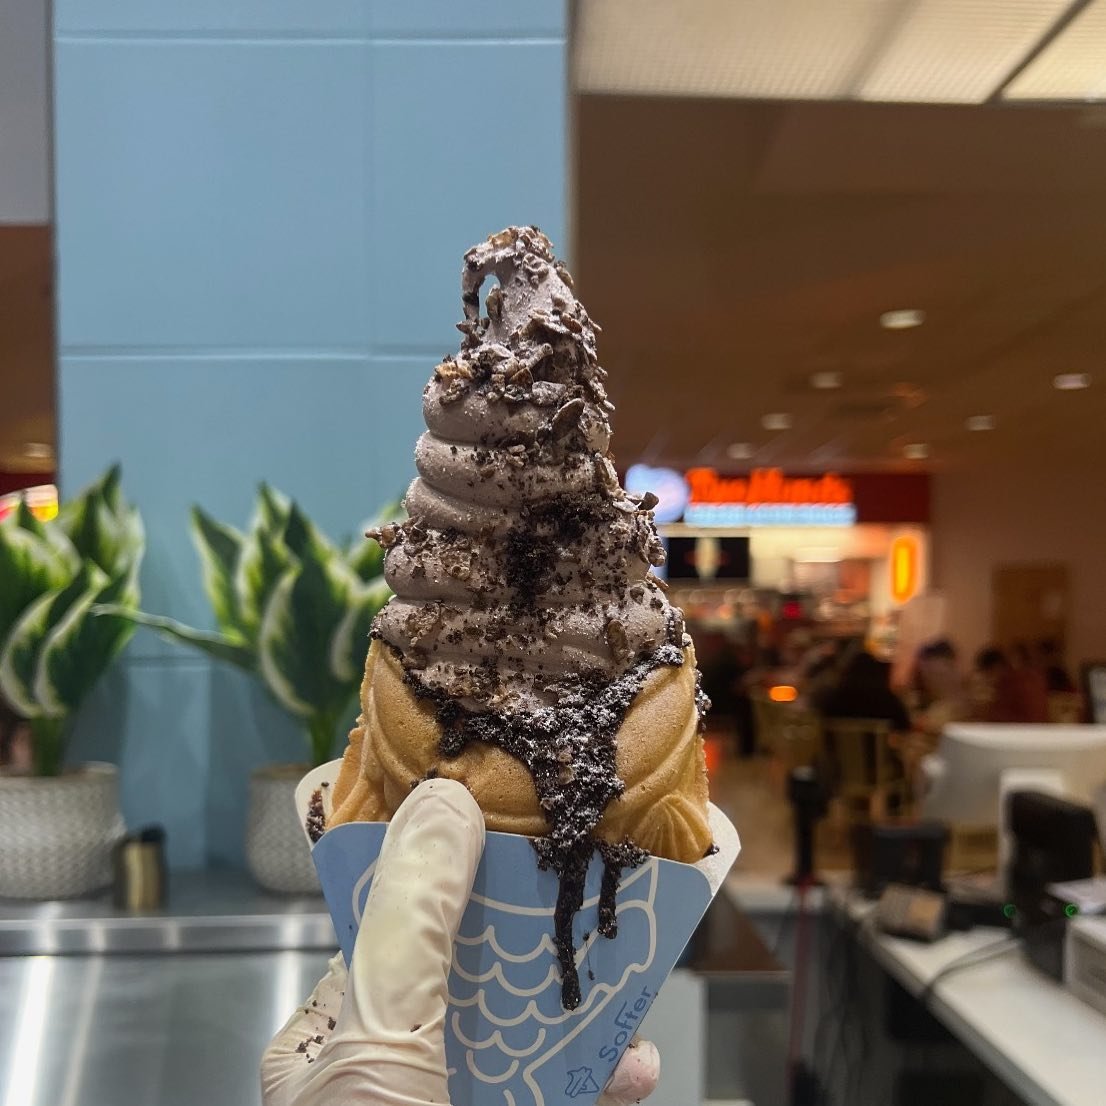 Try our delicious creamy irresistible decadence of chocolate ice cream today. 😋🍫🍦🎶 

#softeranchorage #anchoragealaska #softerdessert #chocolateicecream #icecreaminalaska #happyfriday #desserttime